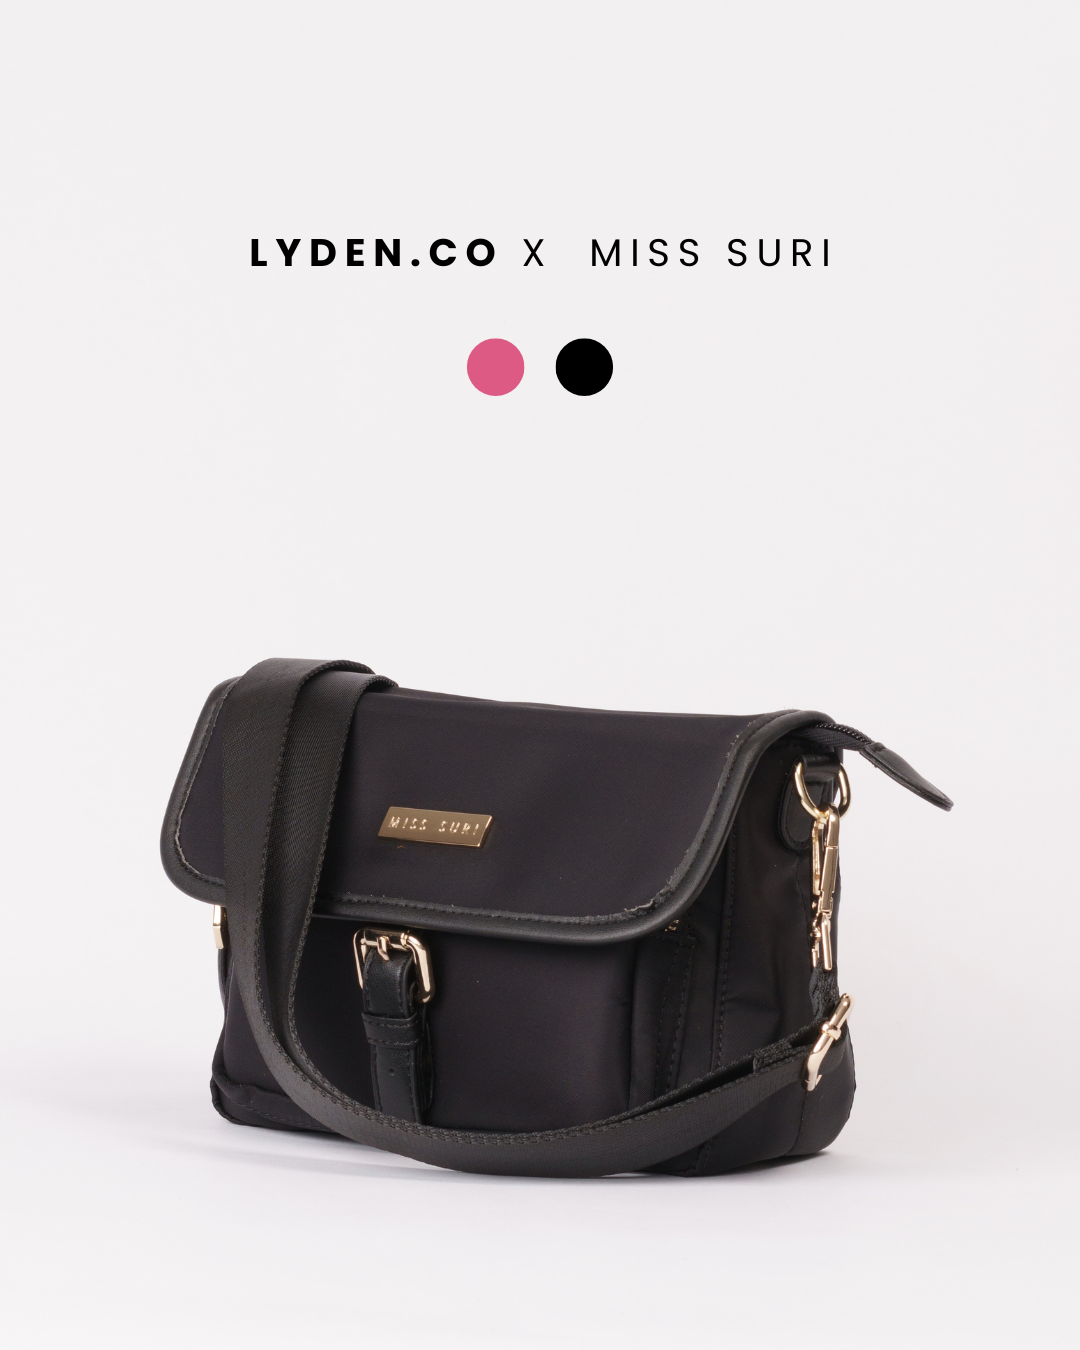 [LYDEN.CO x MISS SURI] Kexie Sling Bag